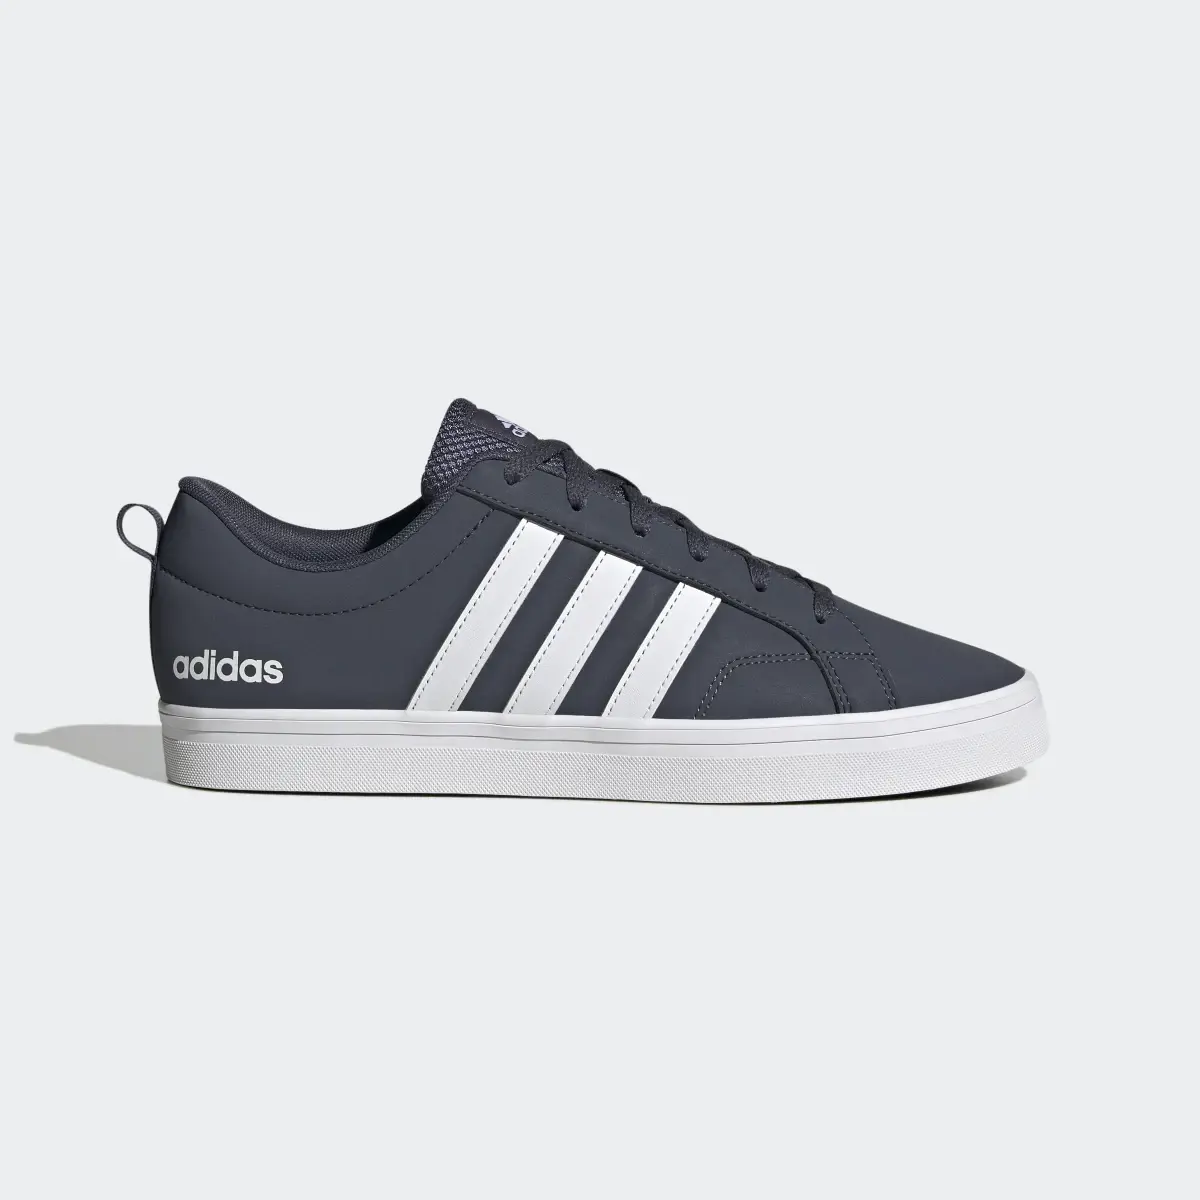 Adidas VS Pace 2.0 Lifestyle Skateboarding Shoes. 2